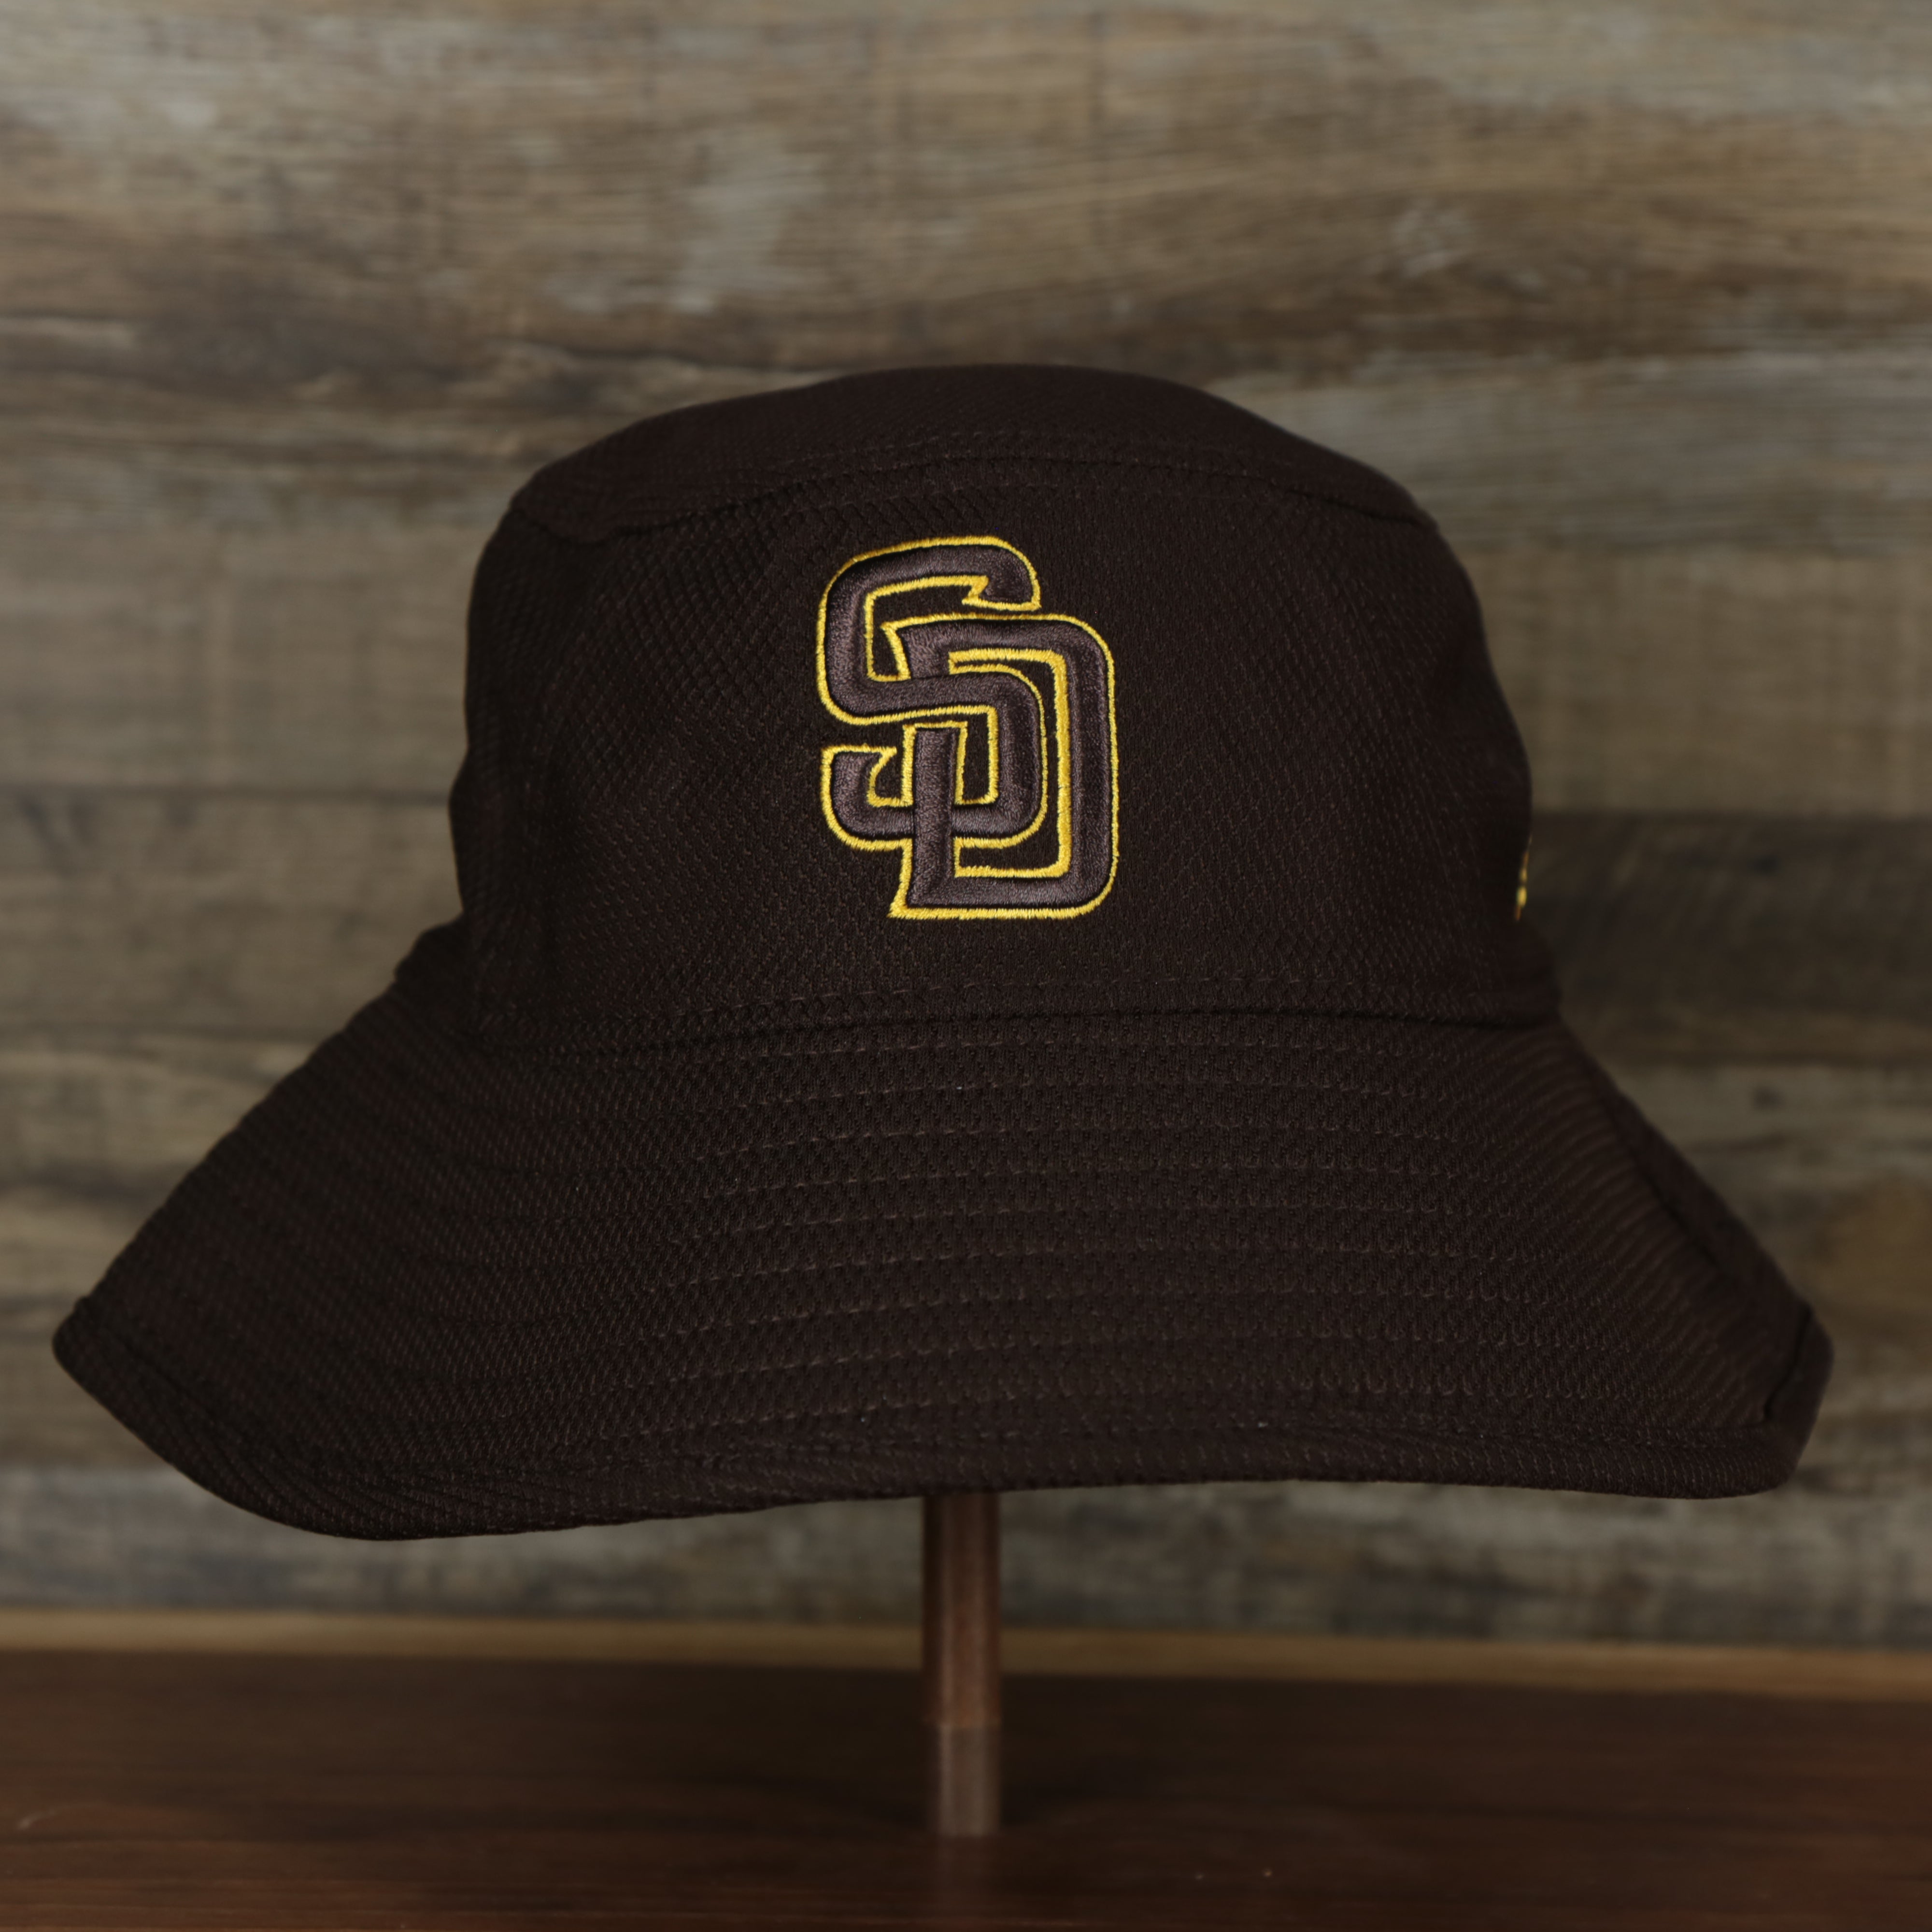 SAN DⵊEGO PADRES BLOGGER on Instagram: The Official On-Field Cap